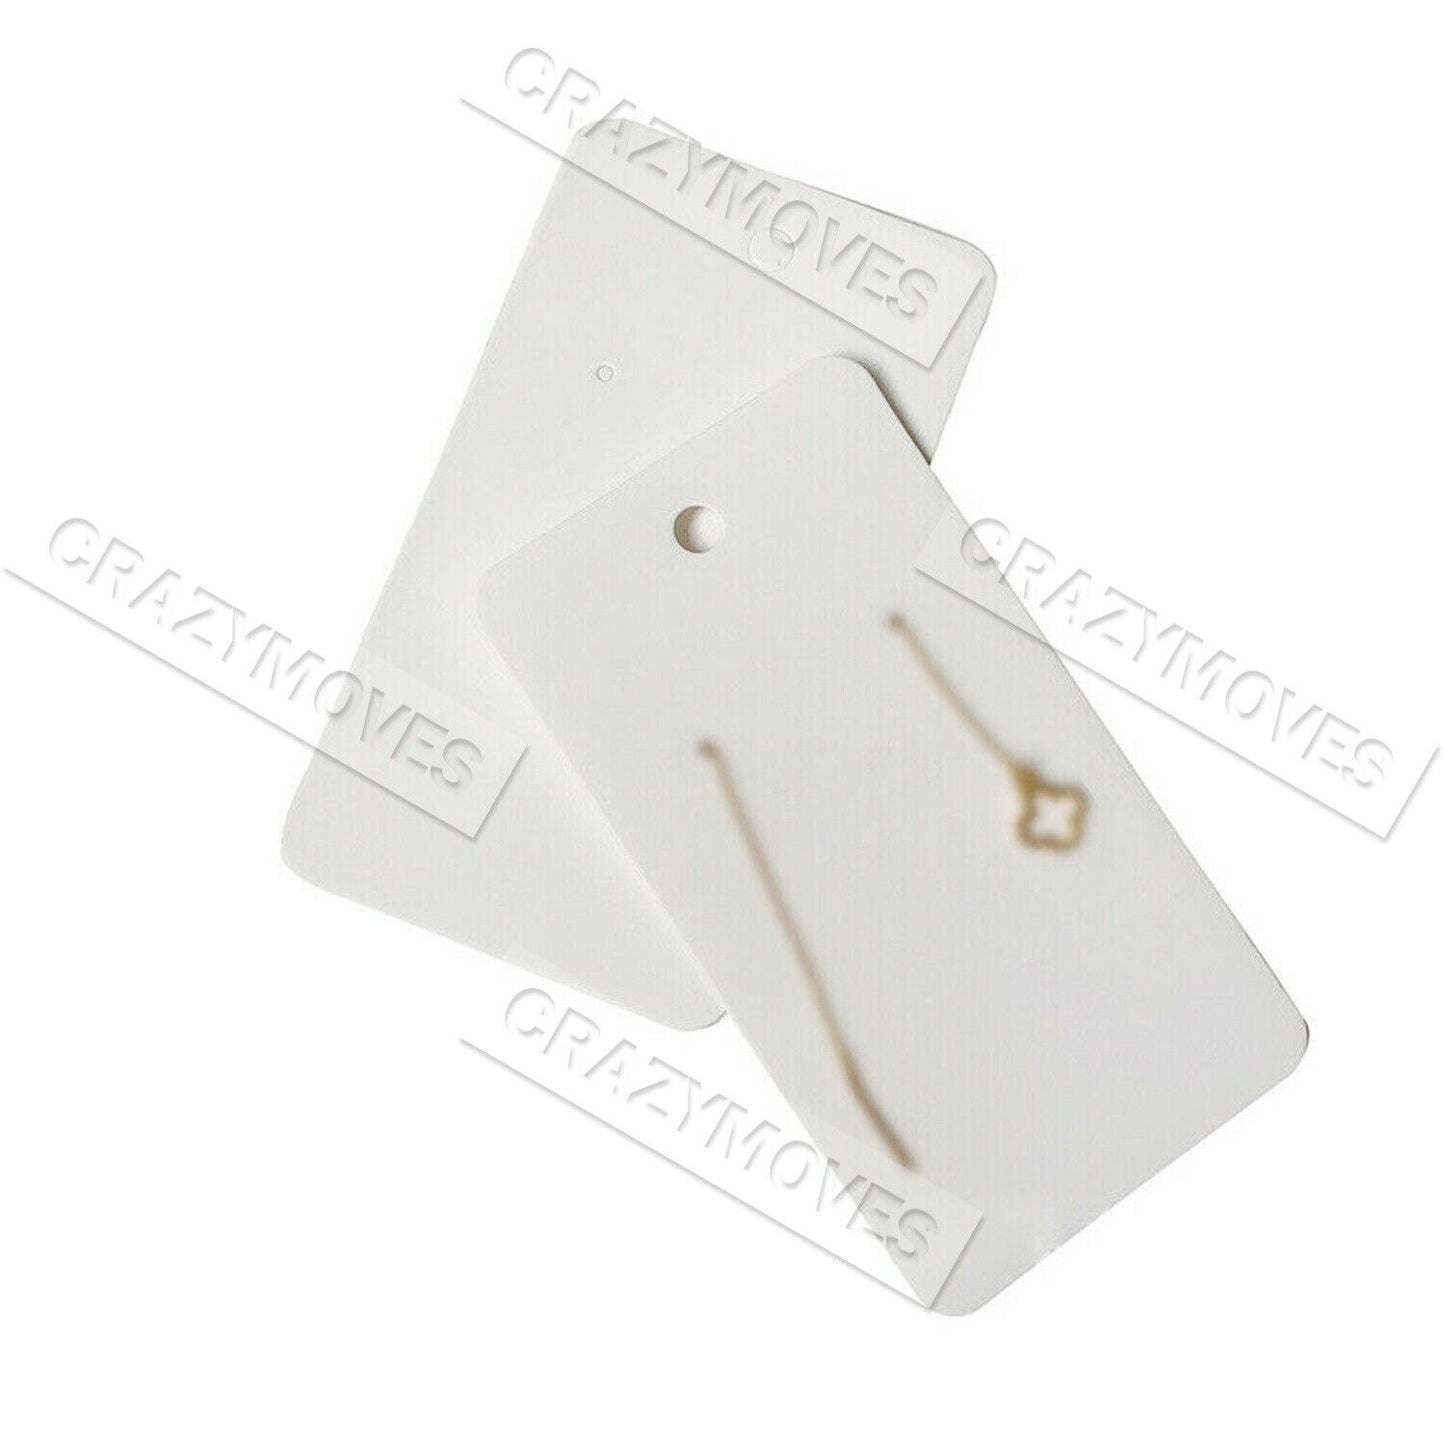 100PCS Earring Cards Cardboard Paper Jewelry Accessories Display Holder